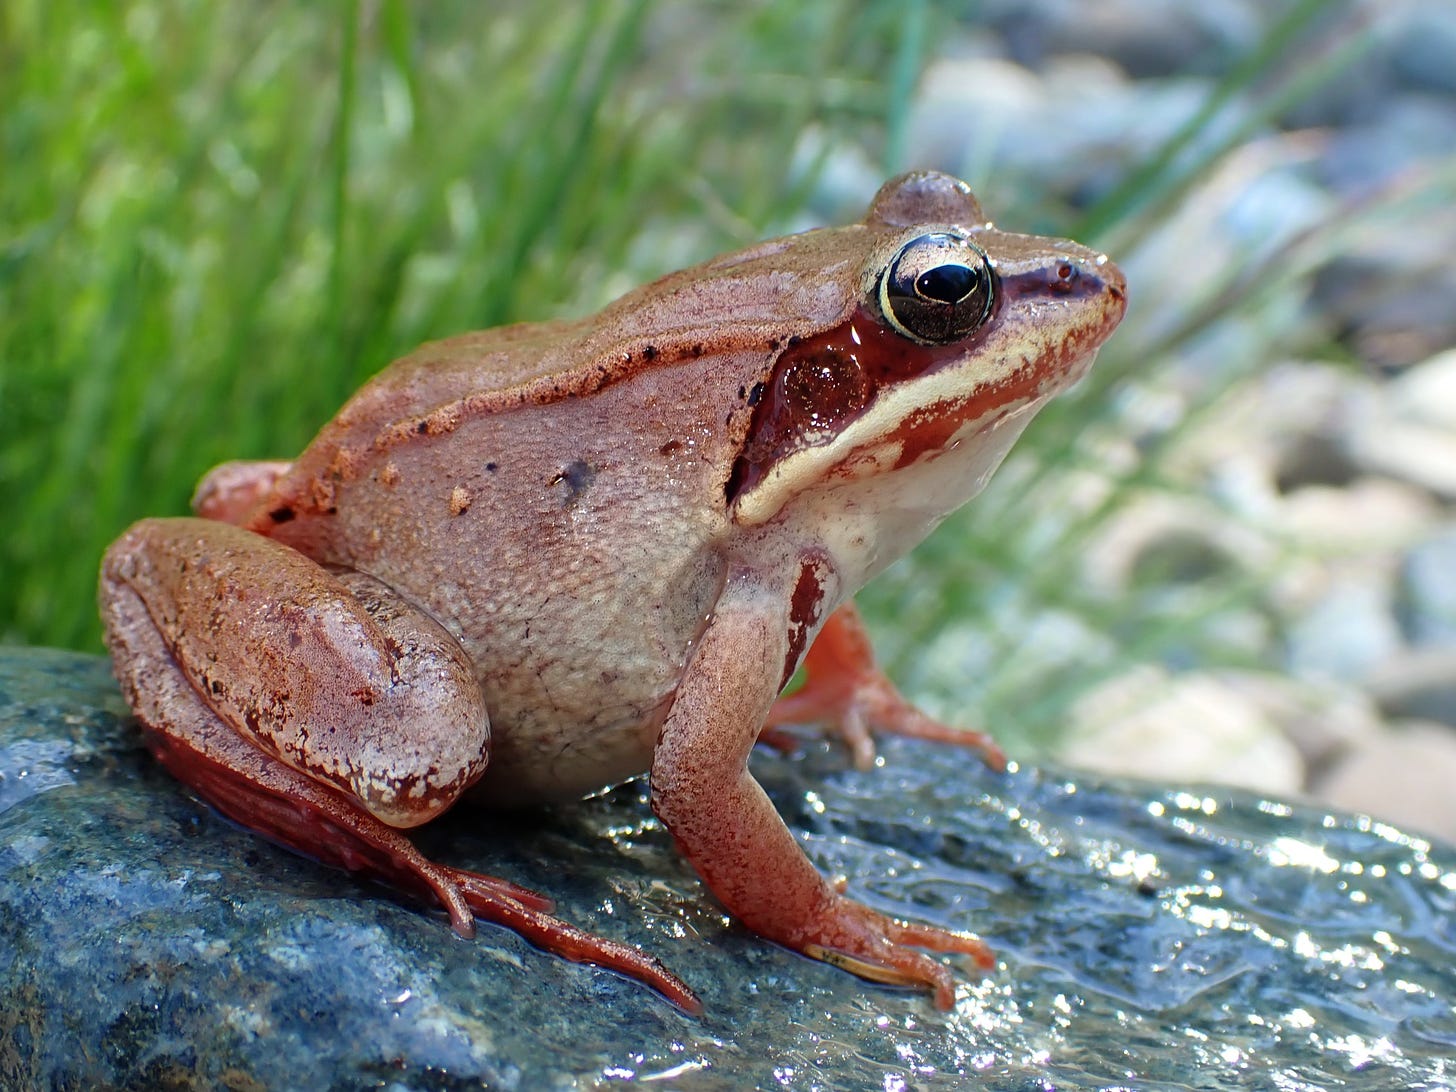 A Wood Frog perches on a smooth stone against a grassy background.